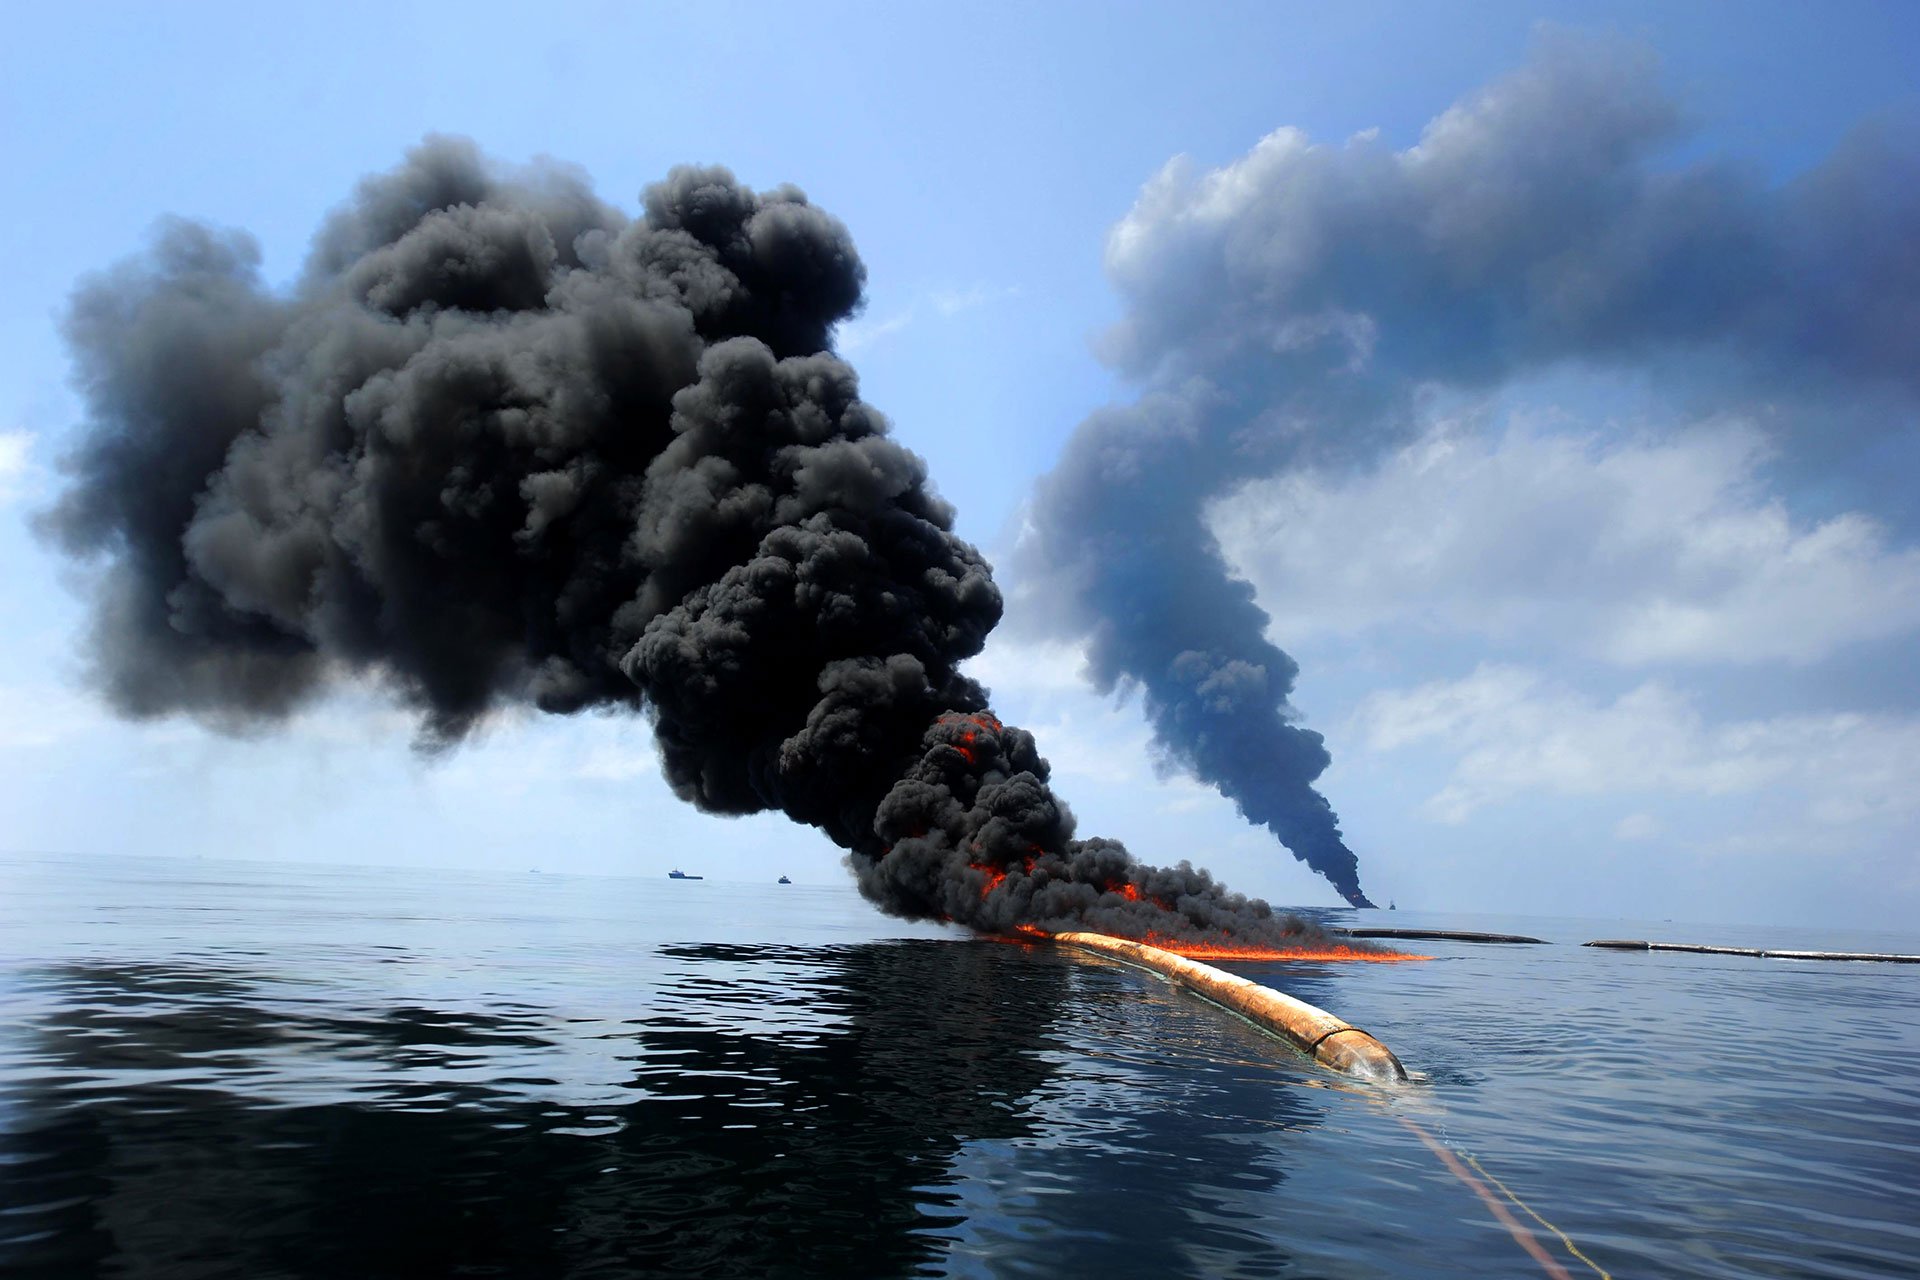 Smoke rises from a fire on the surface of the ocean.